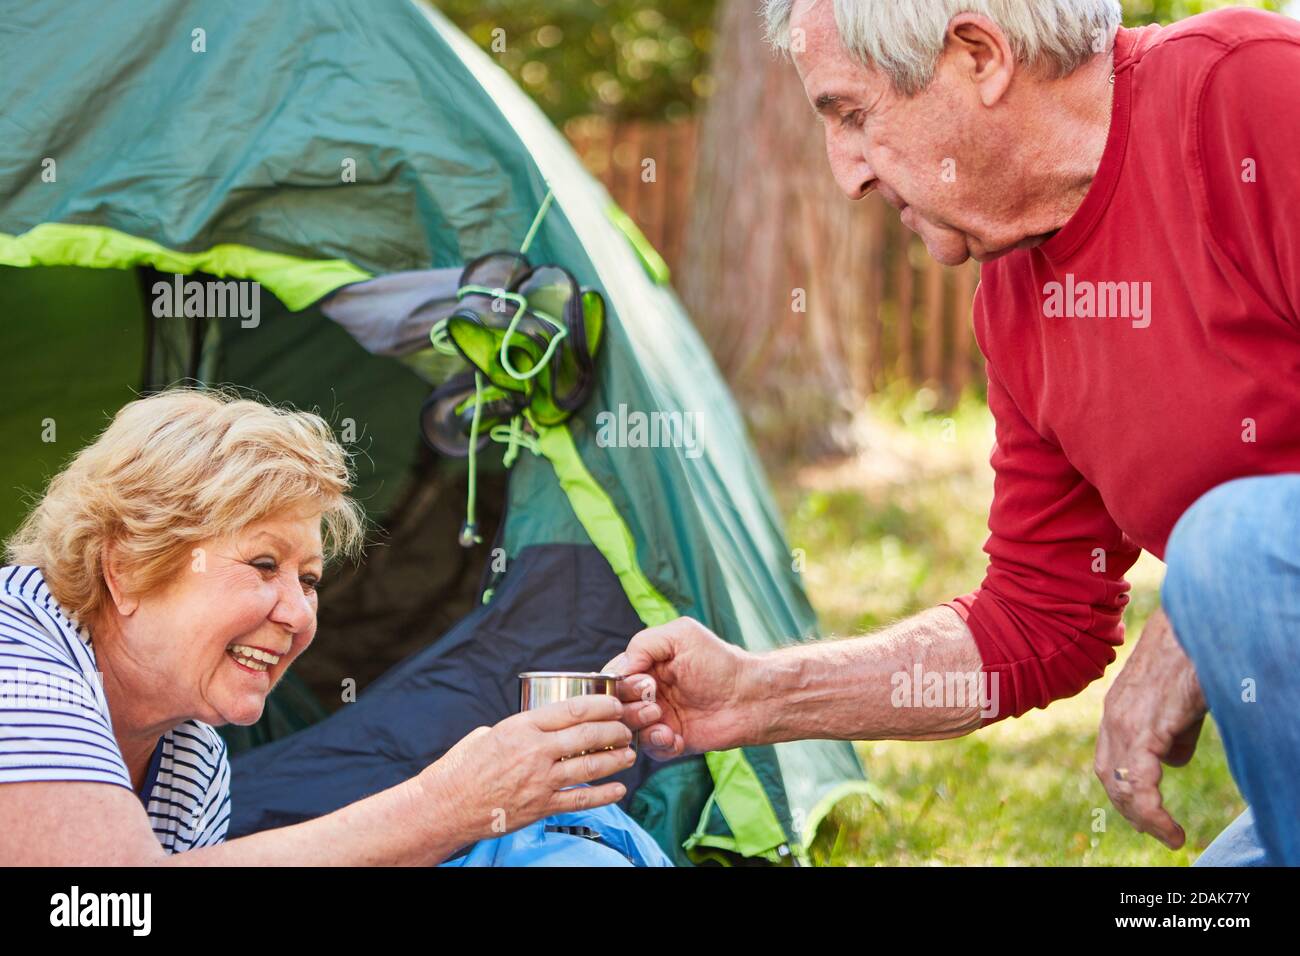 https://c8.alamy.com/comp/2DAK77Y/couple-of-seniors-while-camping-drinking-morning-coffee-in-the-tent-at-the-campsite-2DAK77Y.jpg